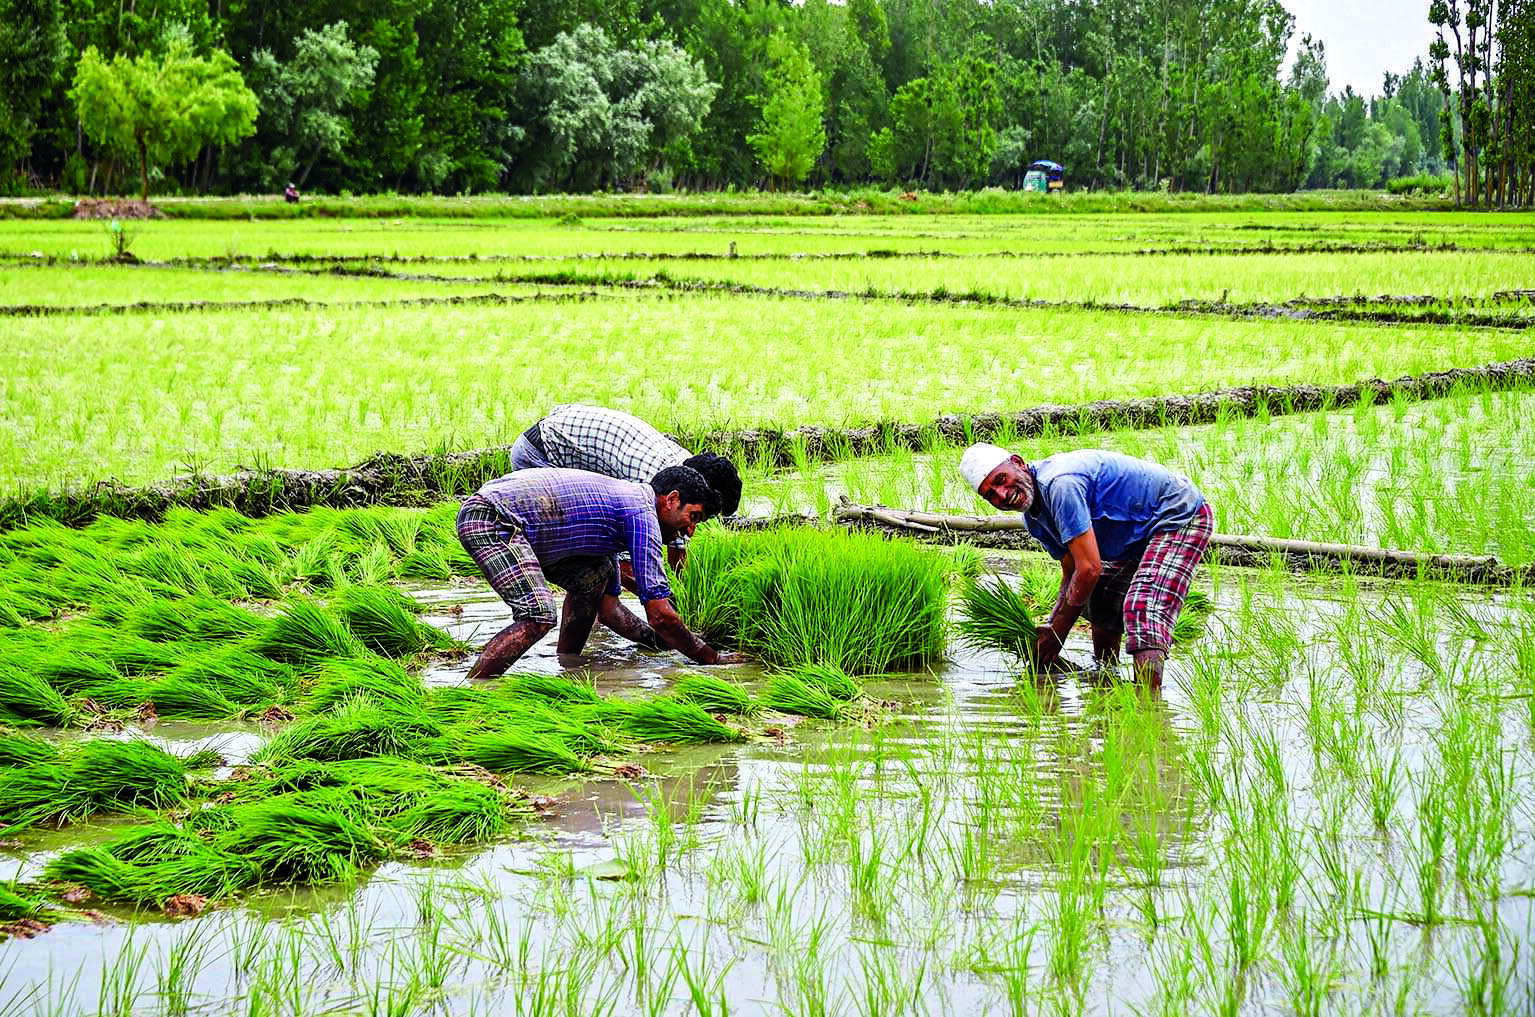 State takes up cultivation of at least 25 indigenous varieties of rice